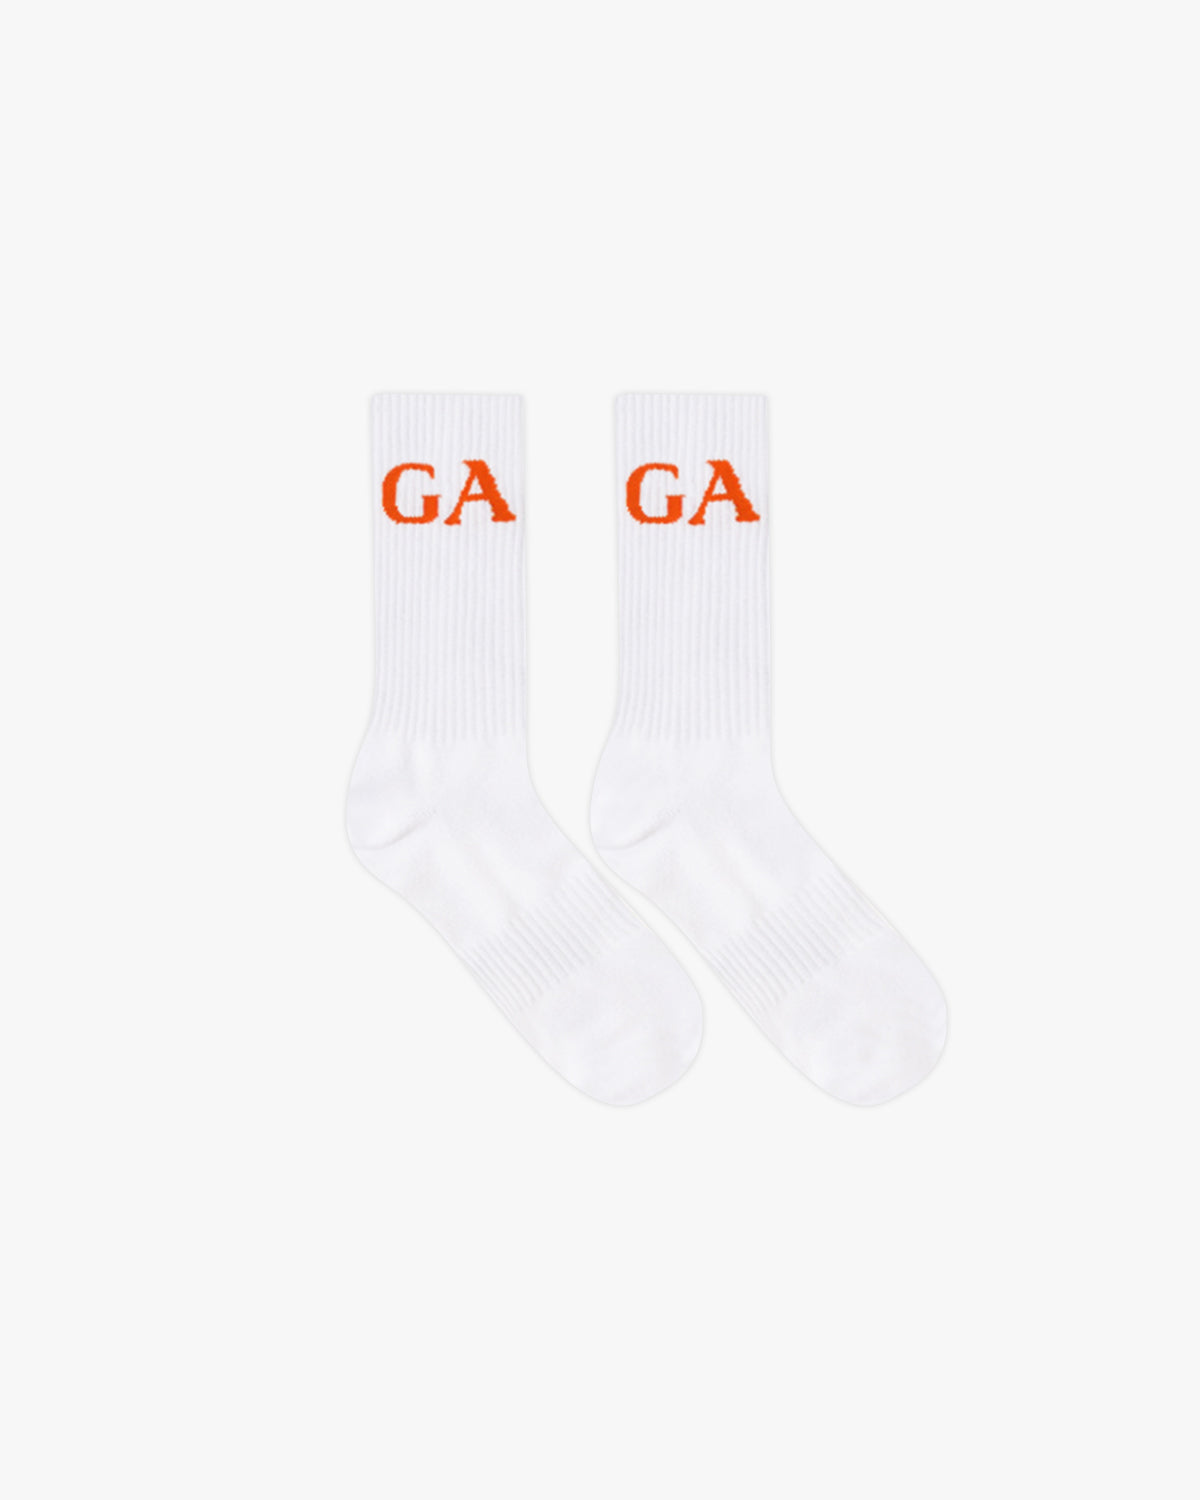 A pair of socks with capital letters GA in orange 